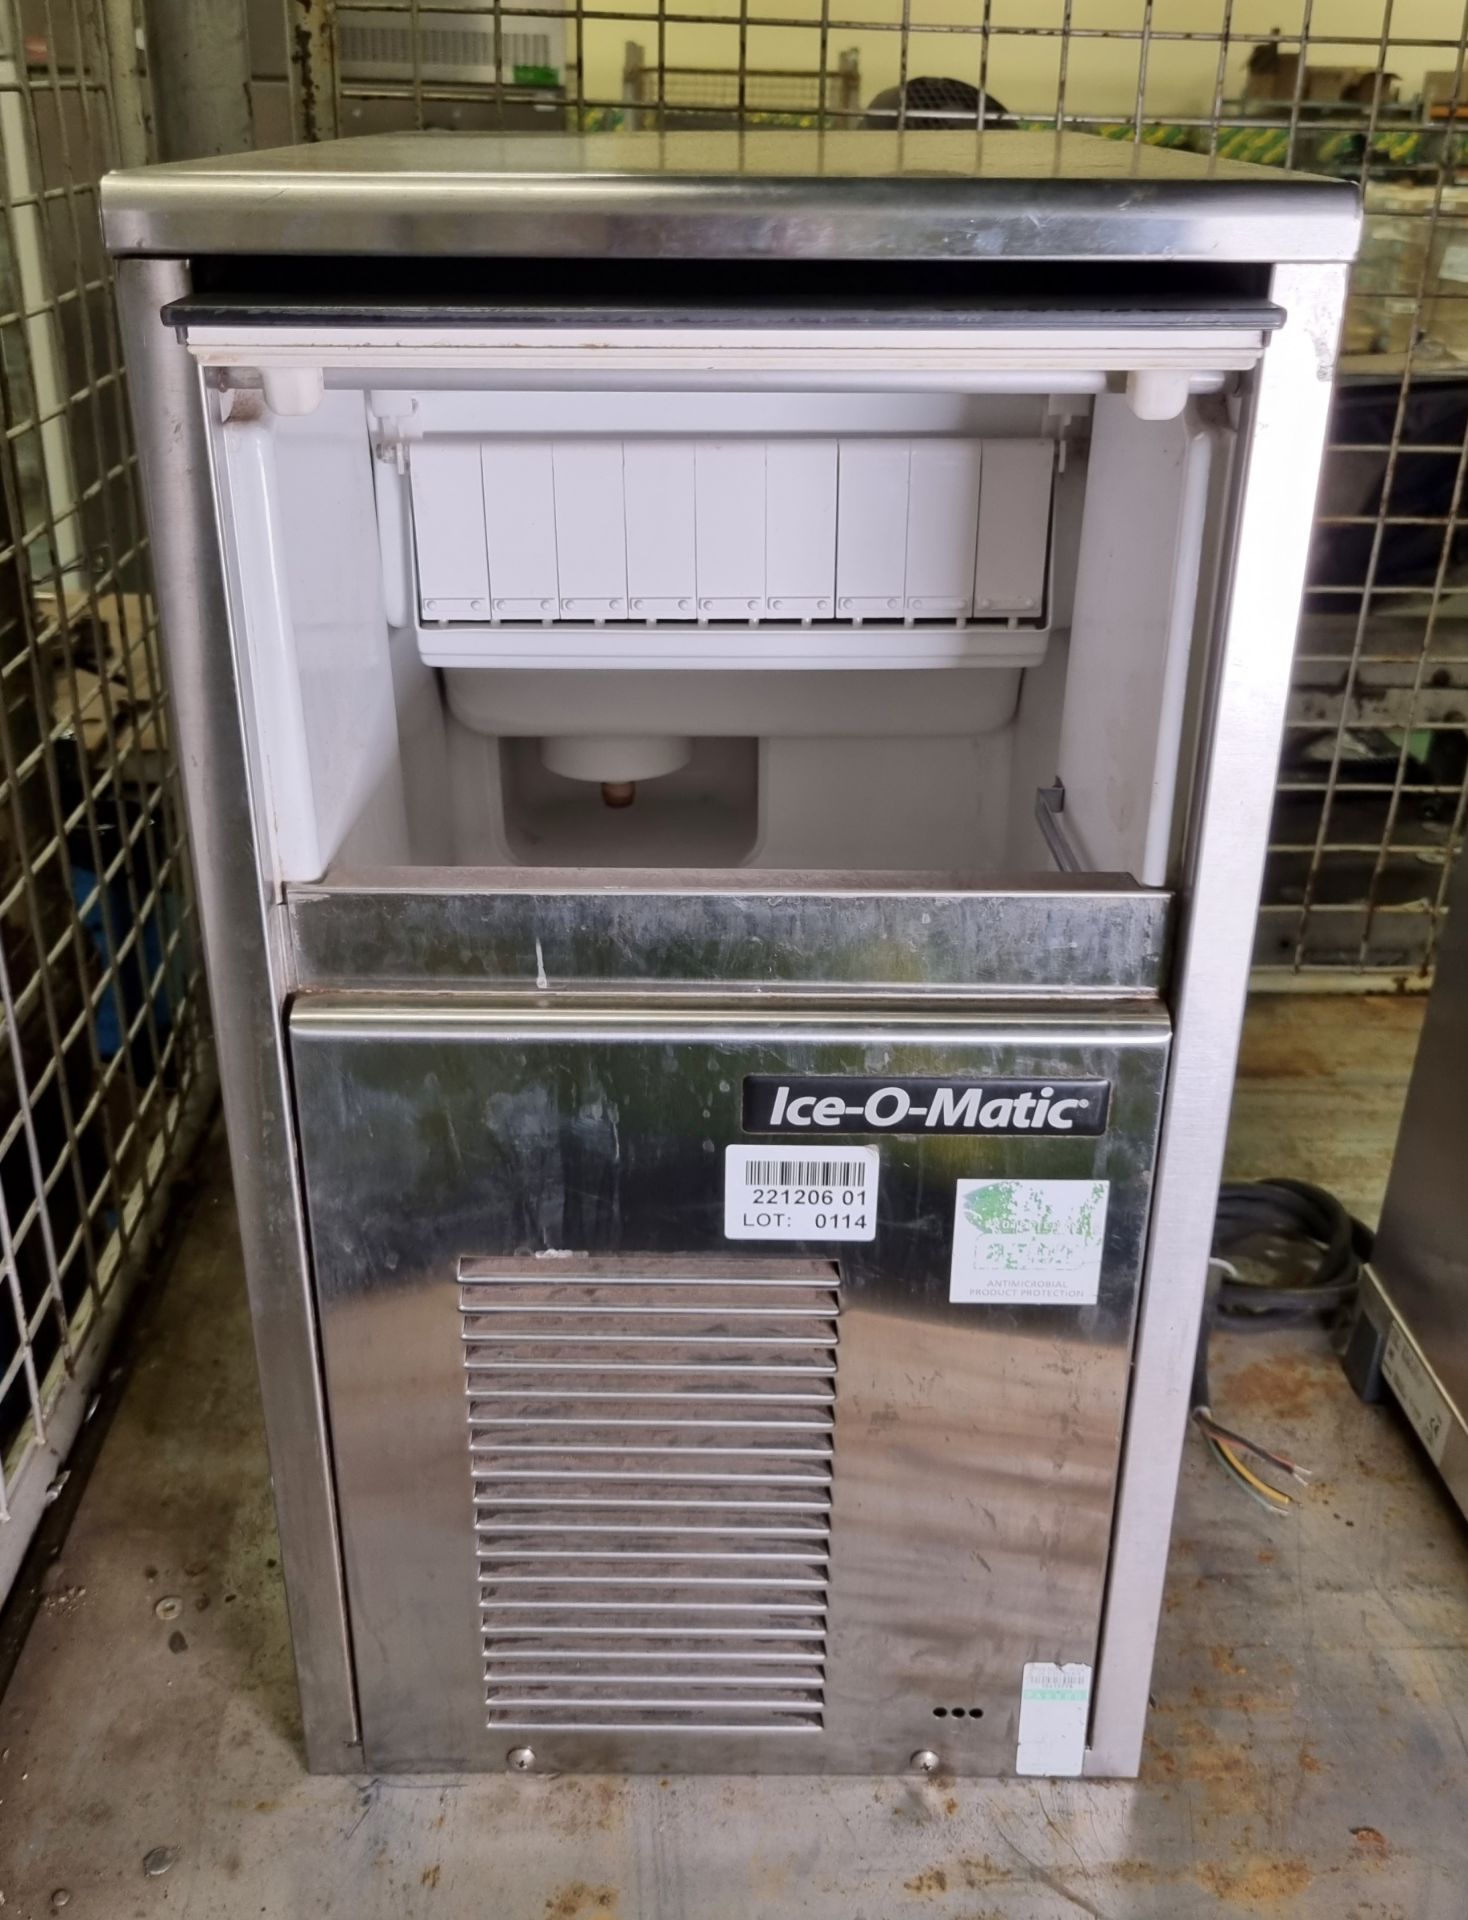 Ice-O-Matic ICEU 035-M-A ice machine 230V - L 33 x W 46 x H 60cm - Image 2 of 5